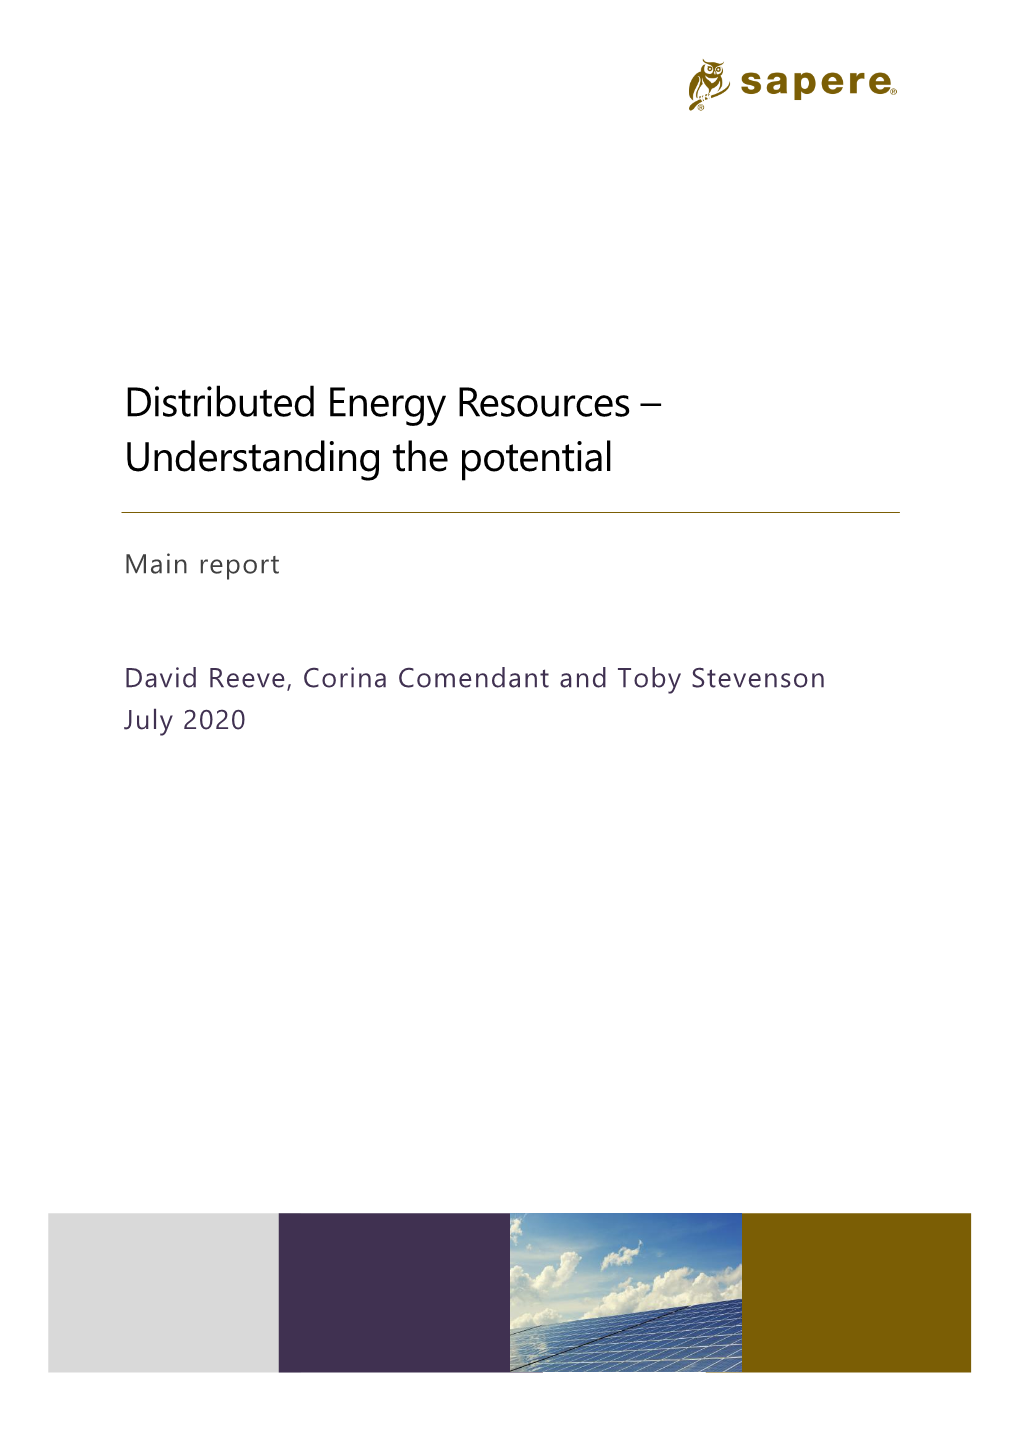 Distributed Energy Resources – Understanding the Potential